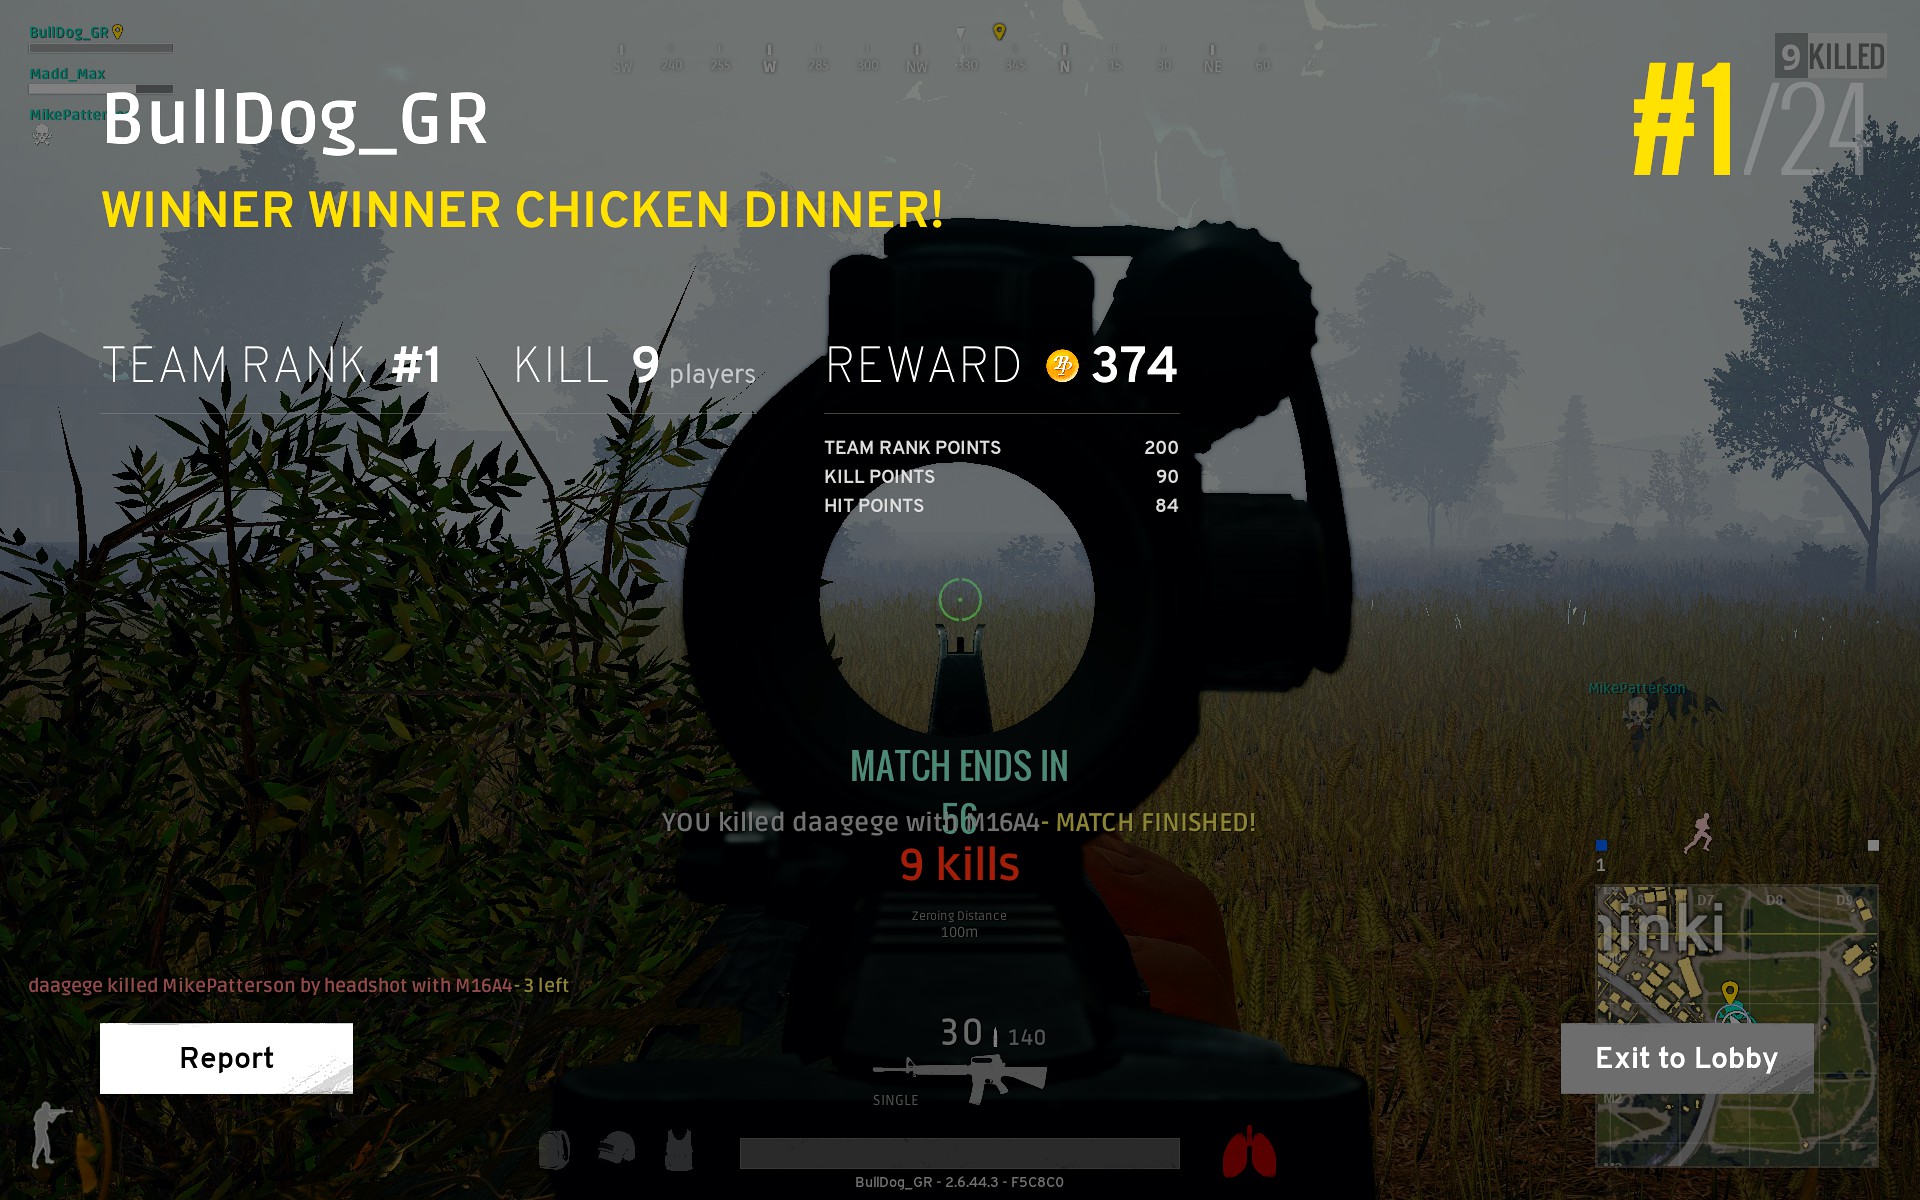 Lets see your Winner Winner Chicken Dinner screenshots! - Page 3 9DAB2D579310171EB1C75BFC602ABFCAD5B4497E